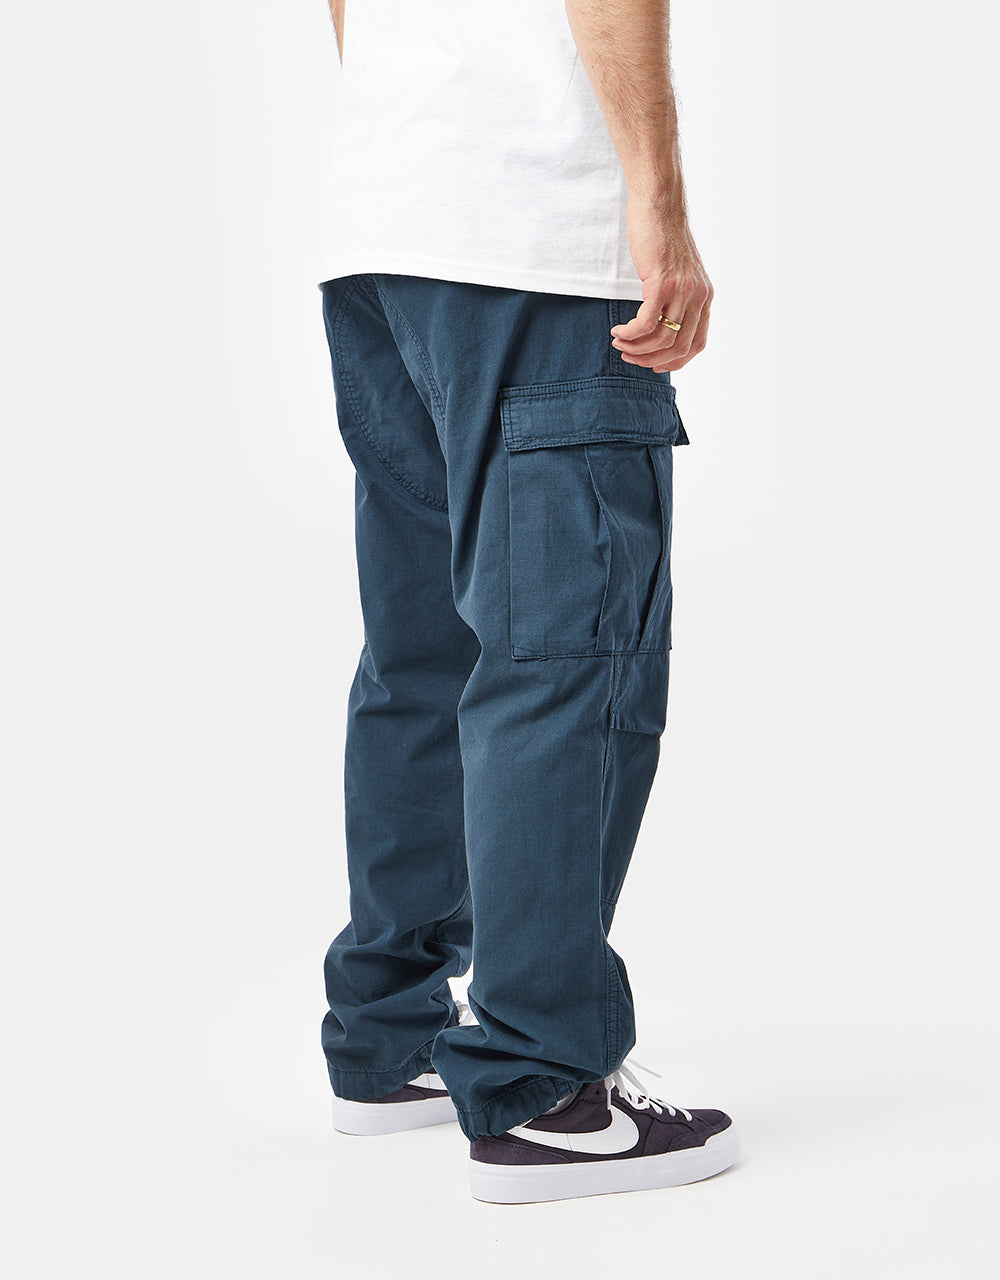 Route One Cargo Pants - Navy